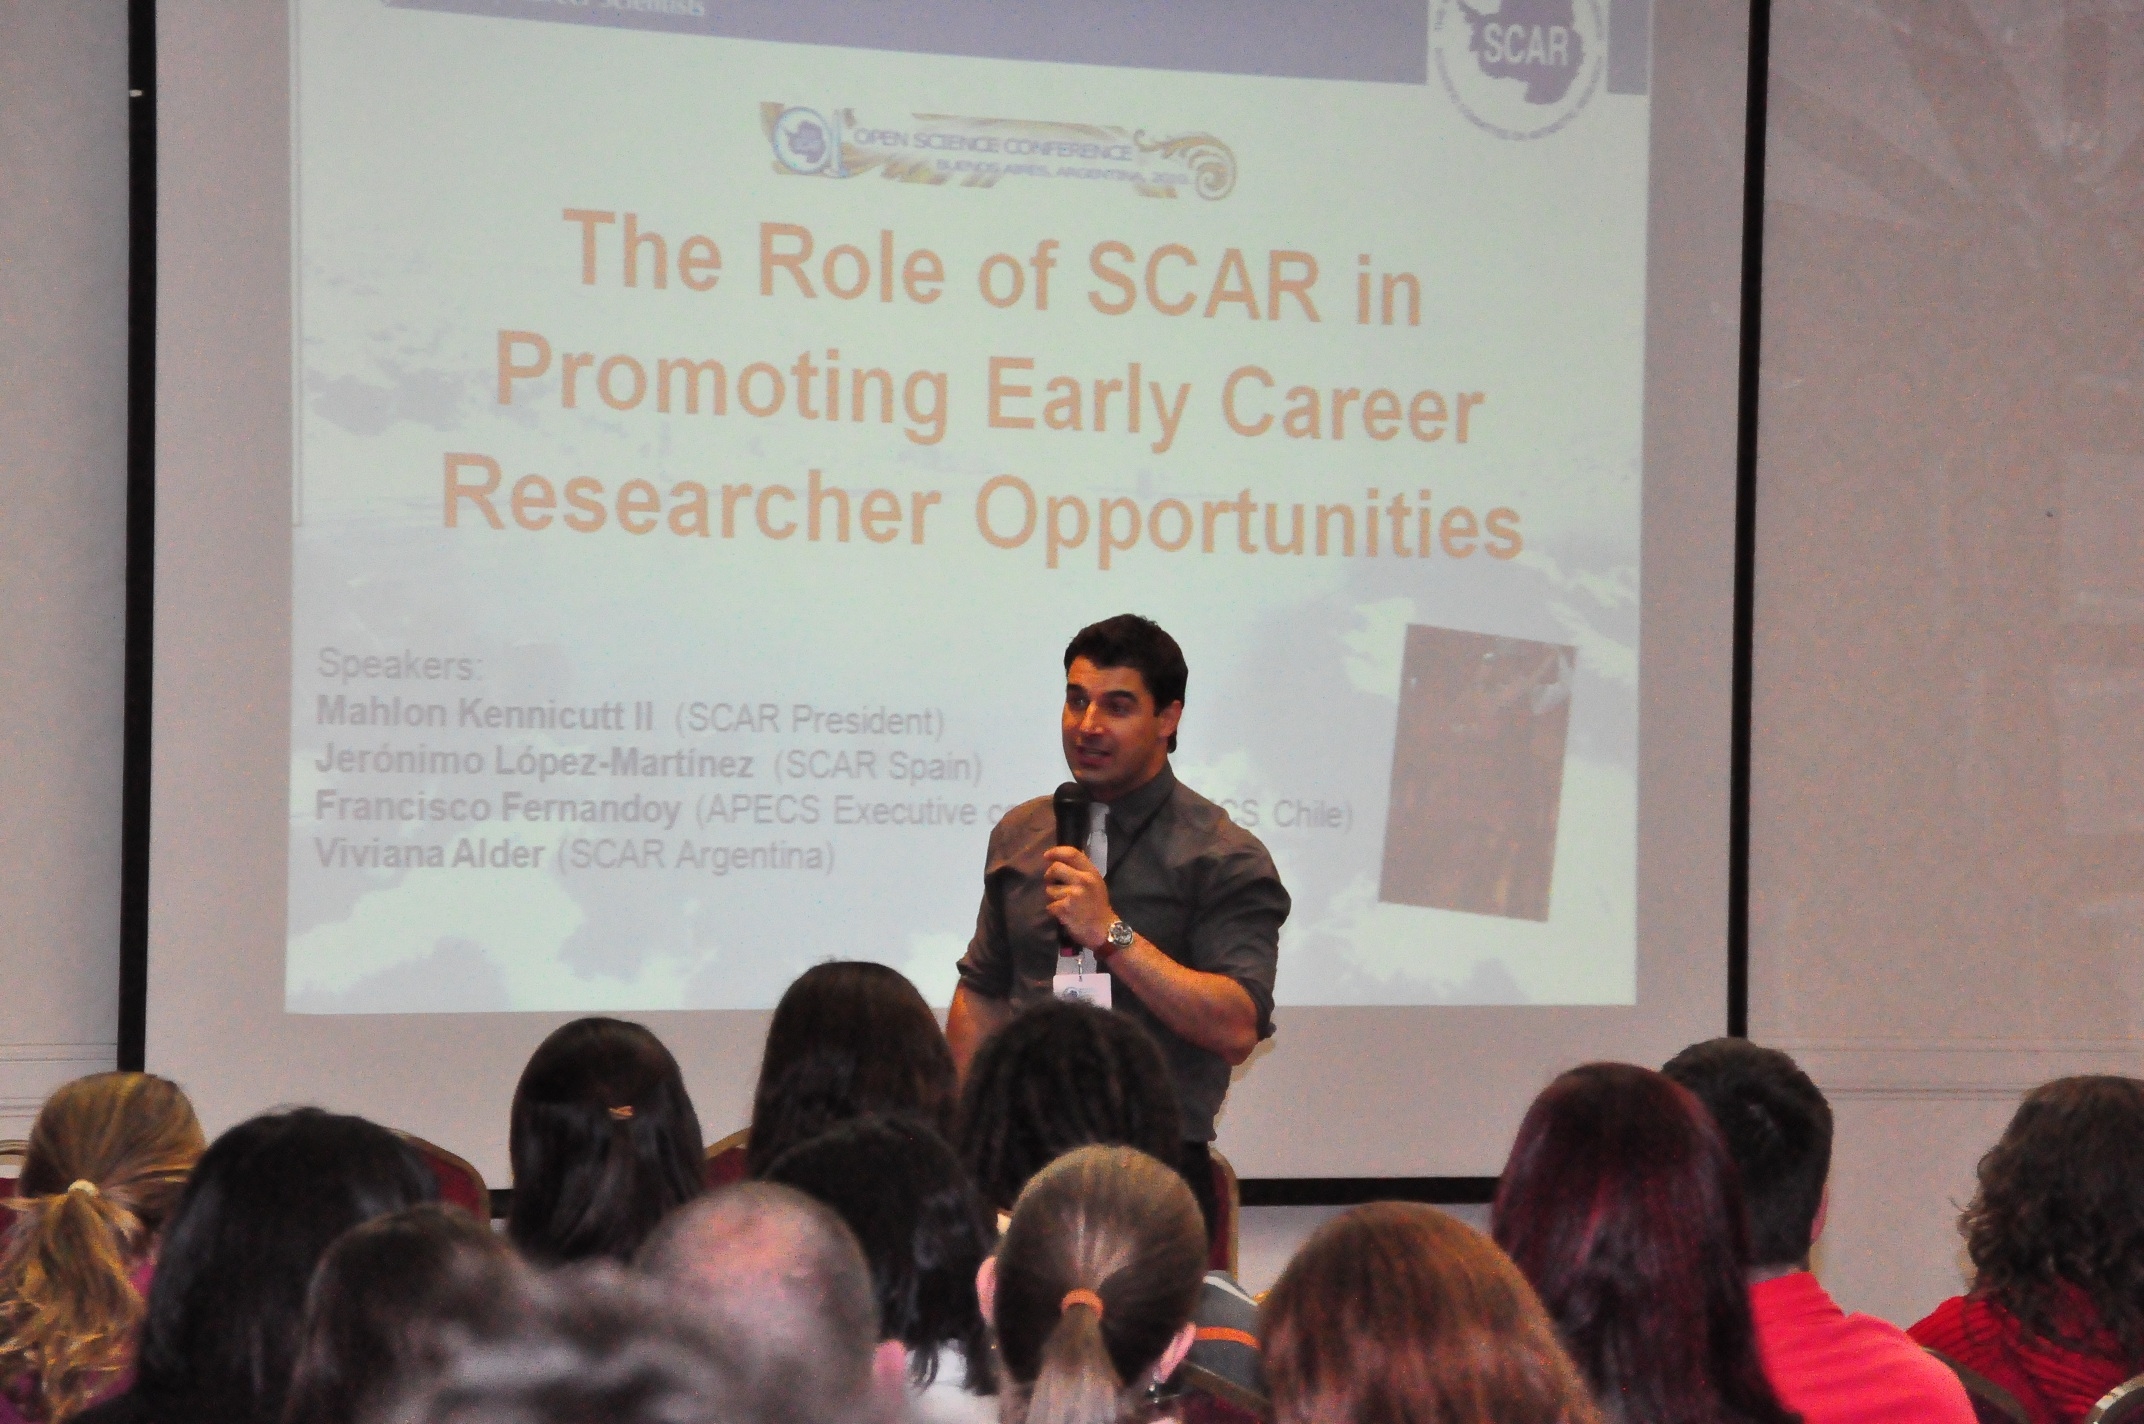 José speaking at the APECS discussion panel at the SCAR conference